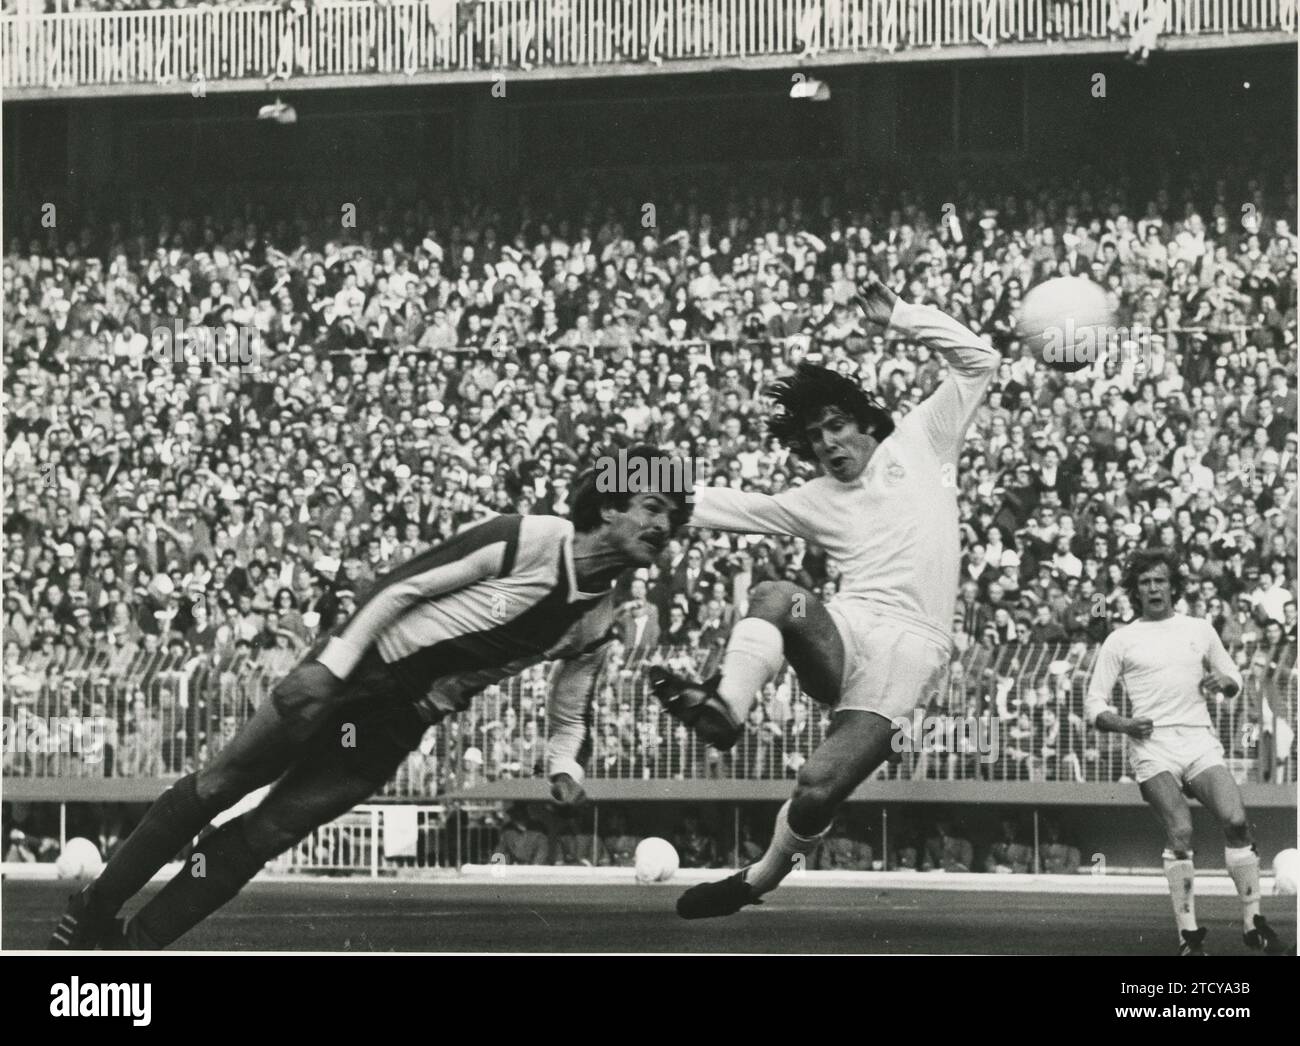 Madrid, 02/05/1978. League match, matchday 20, played at the Santiago Bernabéu stadium between Real Madrid and Español, which ended with the result of 2 to 1 for the locals. IN the image, Santillana and Juan Huertas Carmona fight for an aerial ball. In the background, Jensen. Credit: Album / Archivo ABC / José García Stock Photo